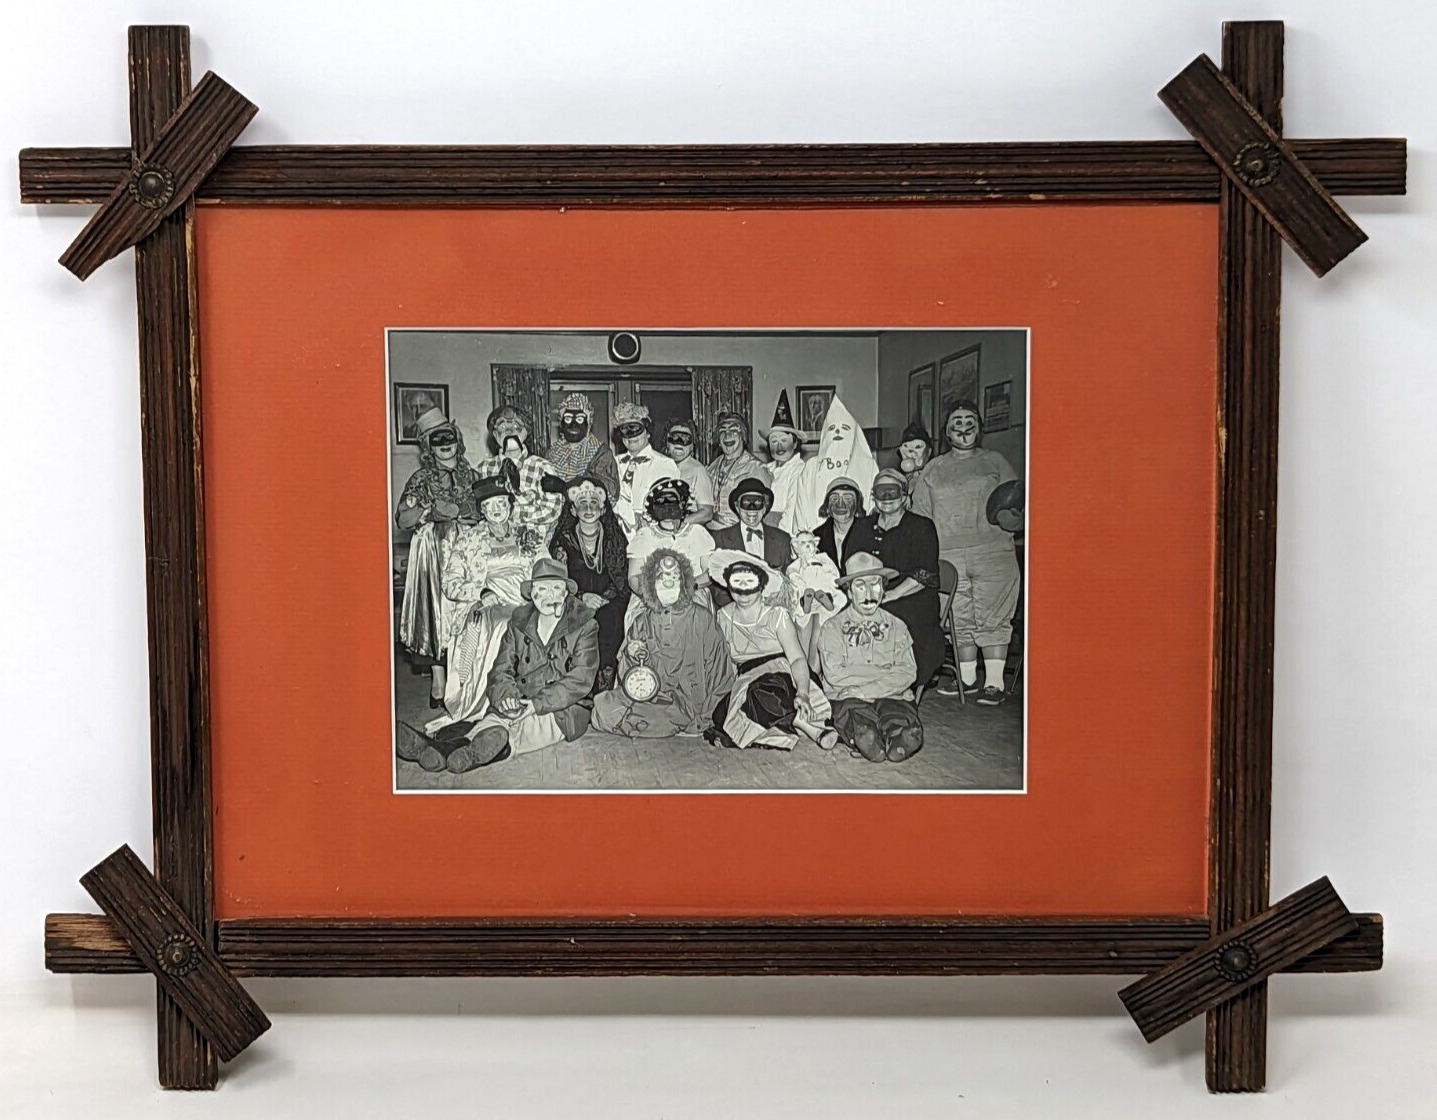 Antique Halloween Costume Party Group Creepy Spooky Framed Photo Photograph O23